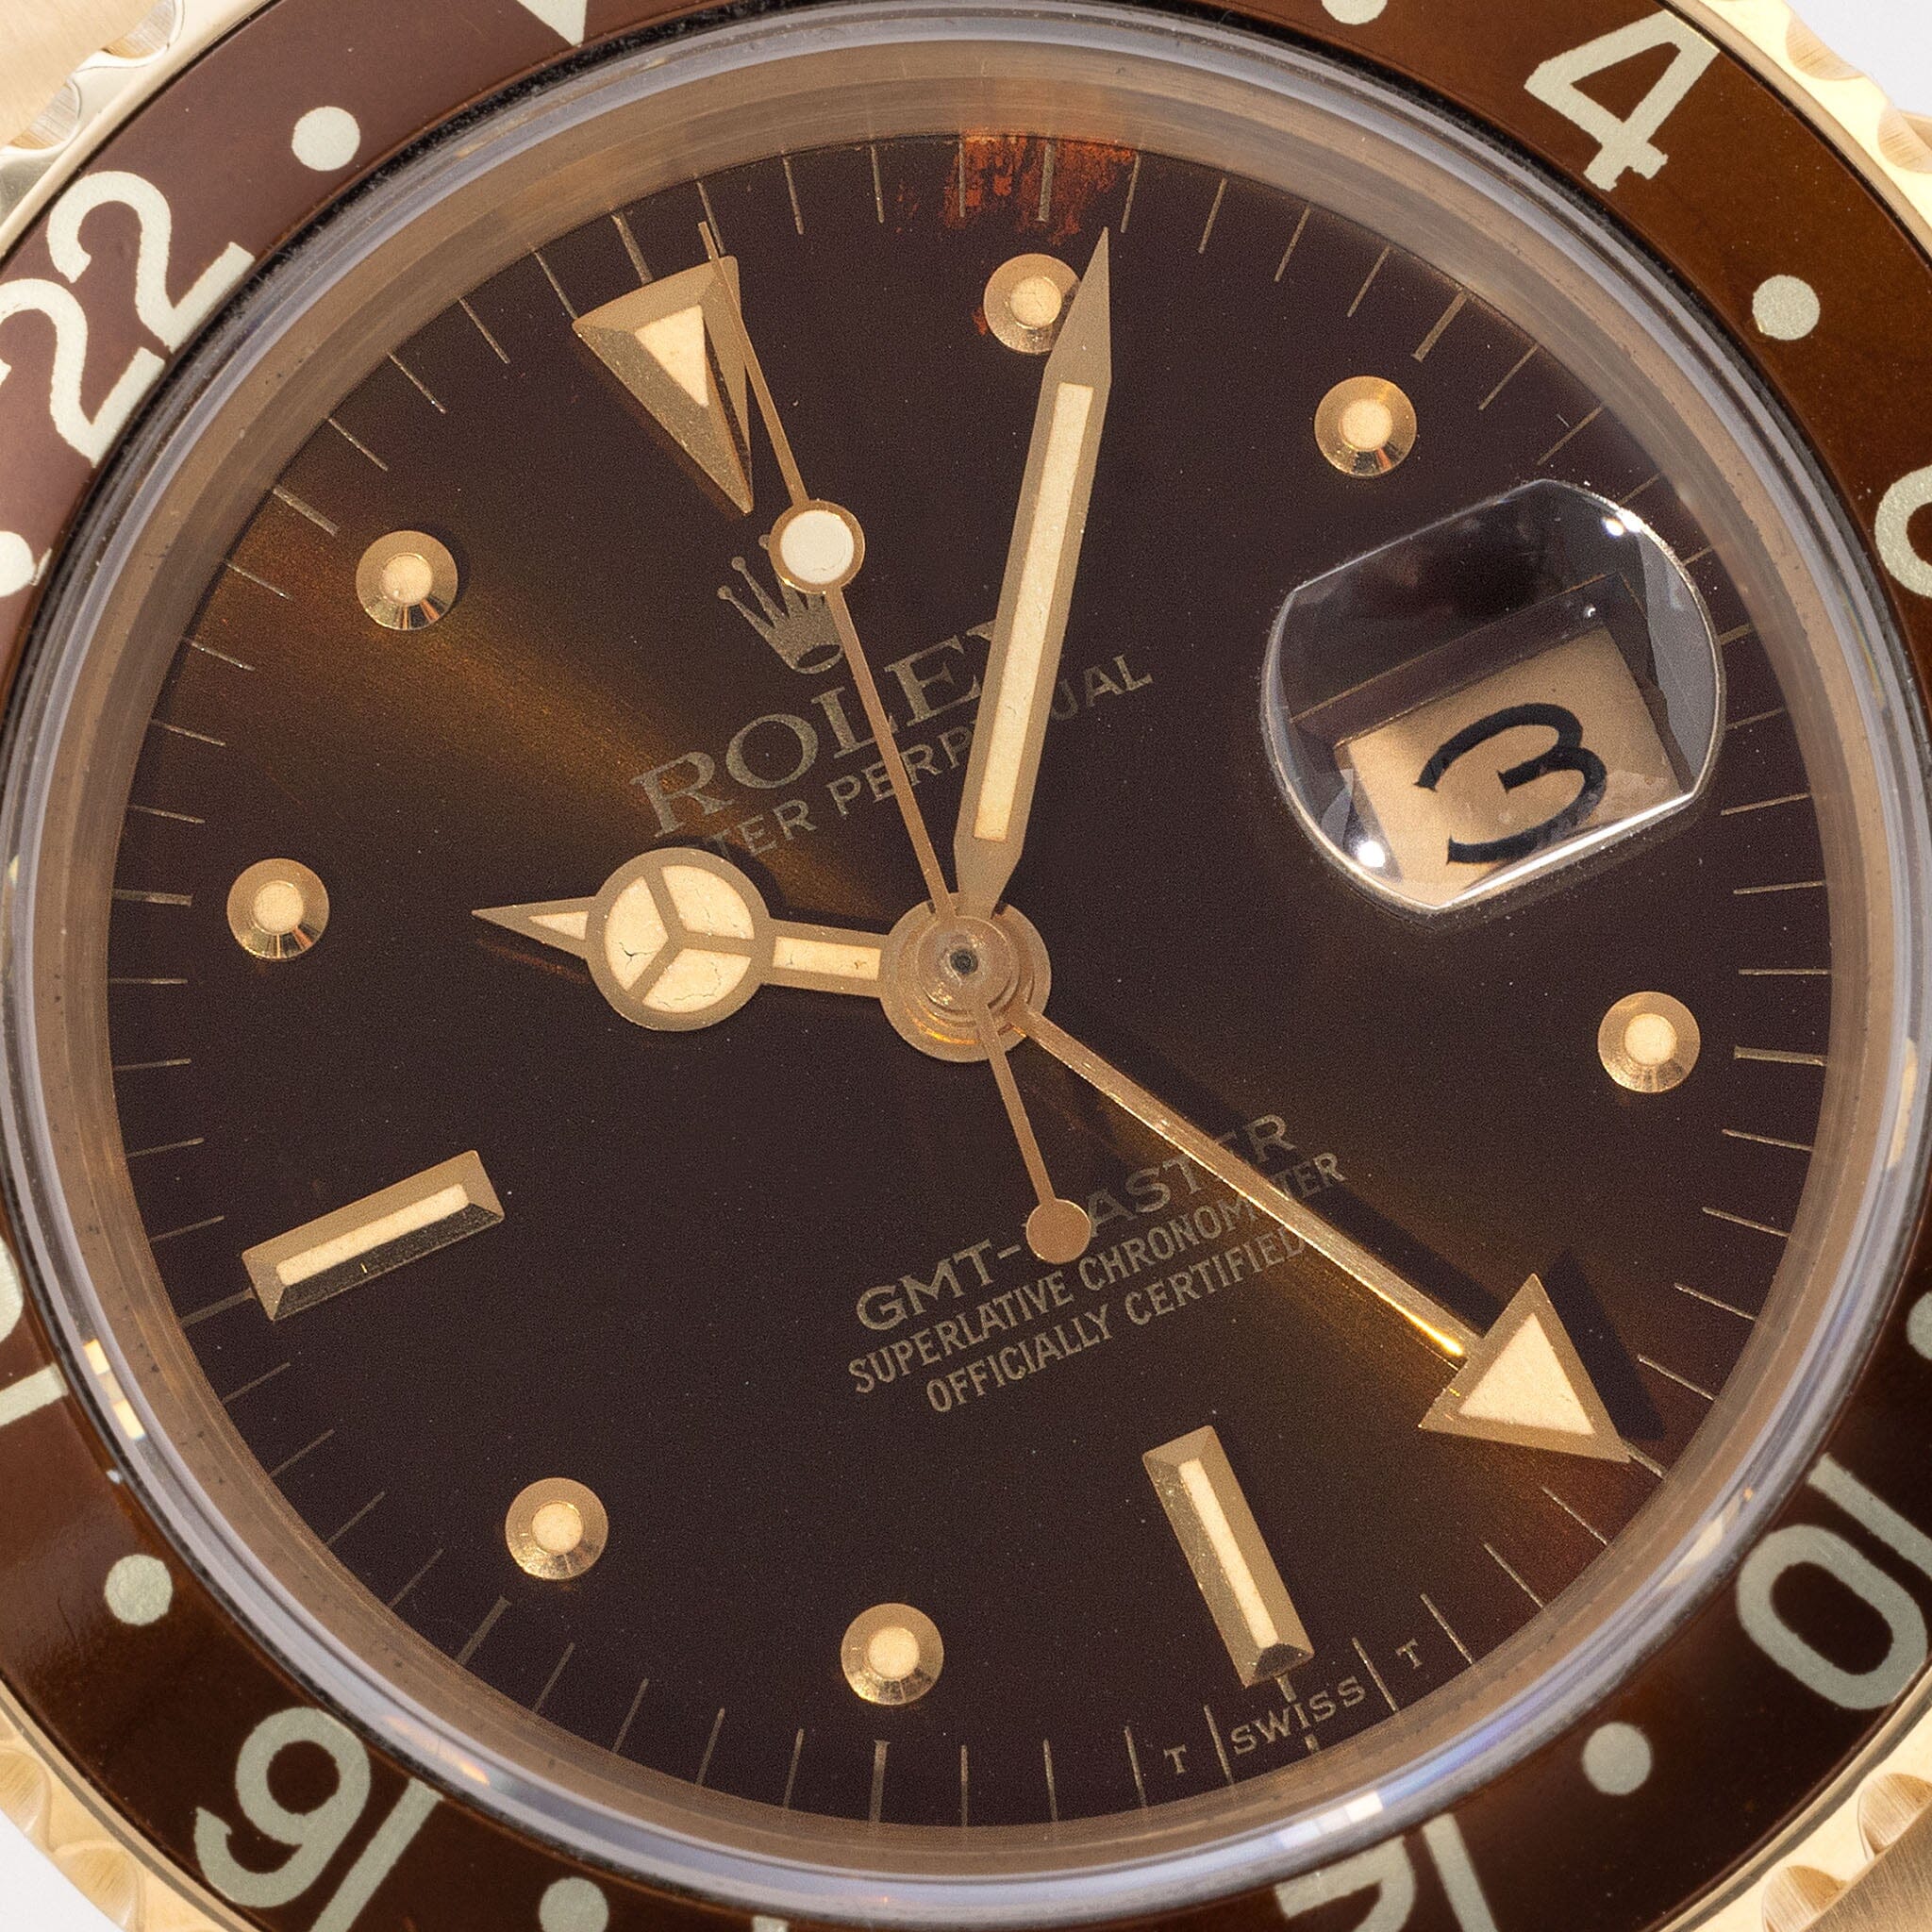 Rolex GMT-Master Brown Nipple Dial Ref 16758 with Papers